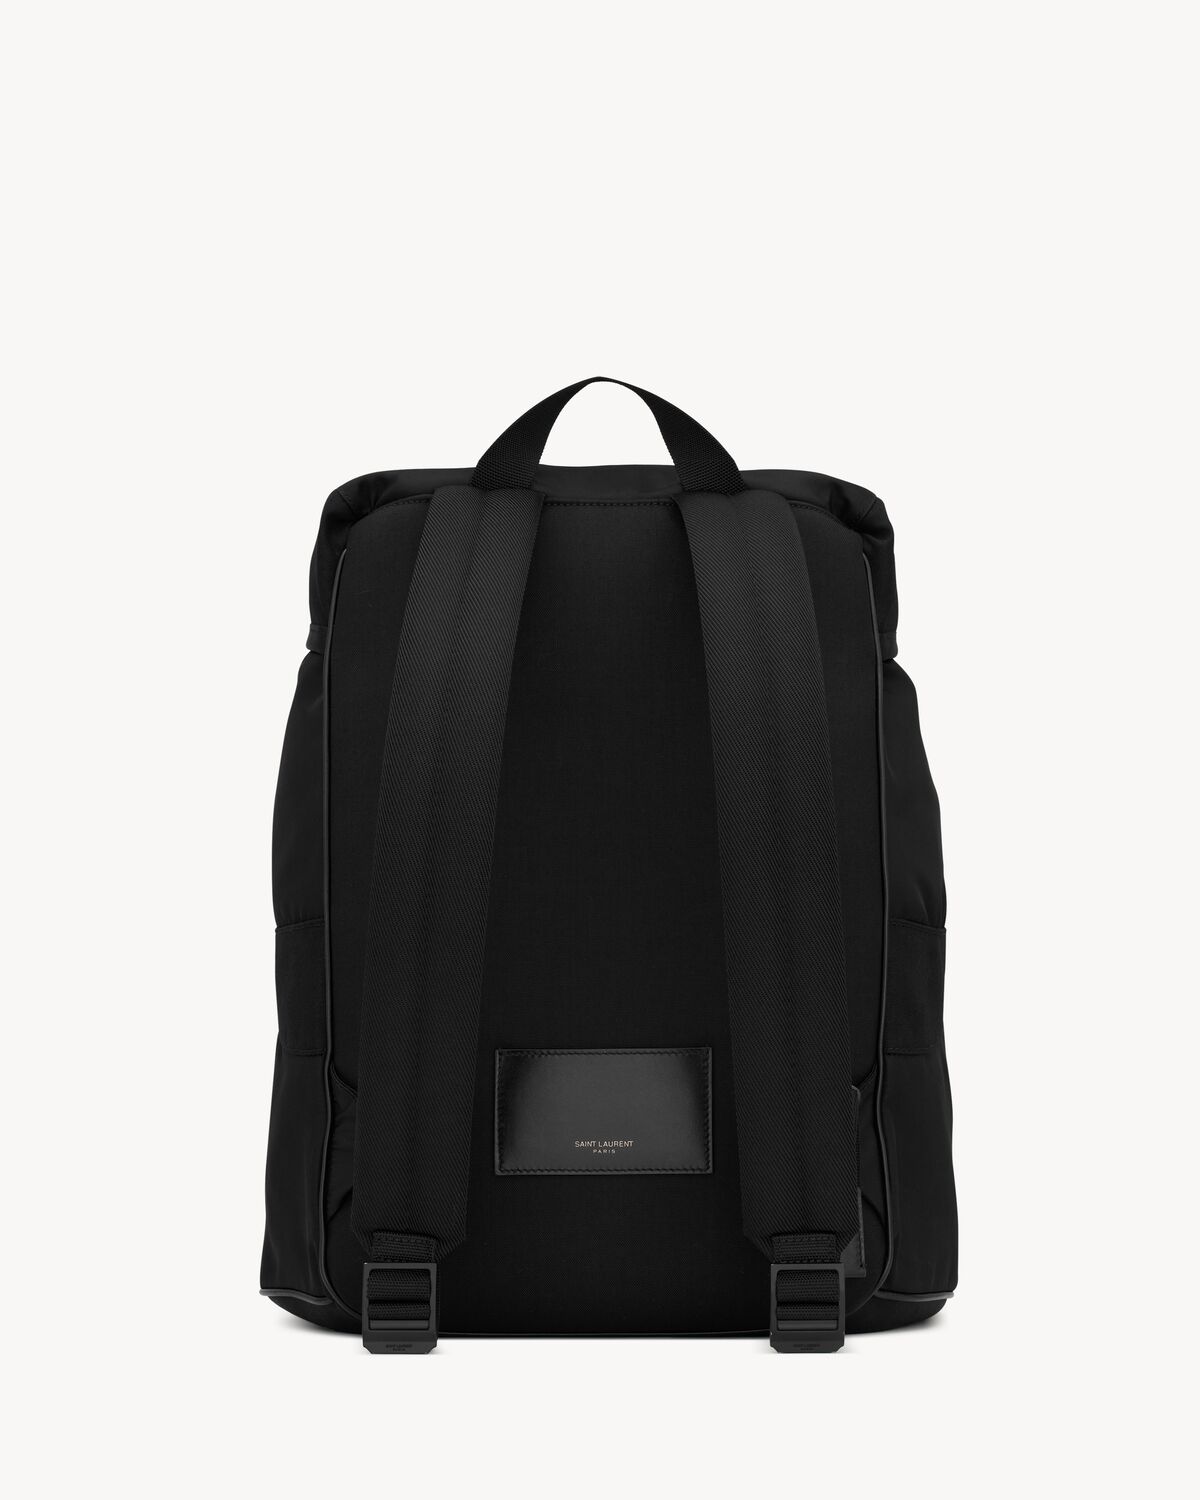 SAINT LAURENT backpack in ECONYL® and vegetable-tanned leather